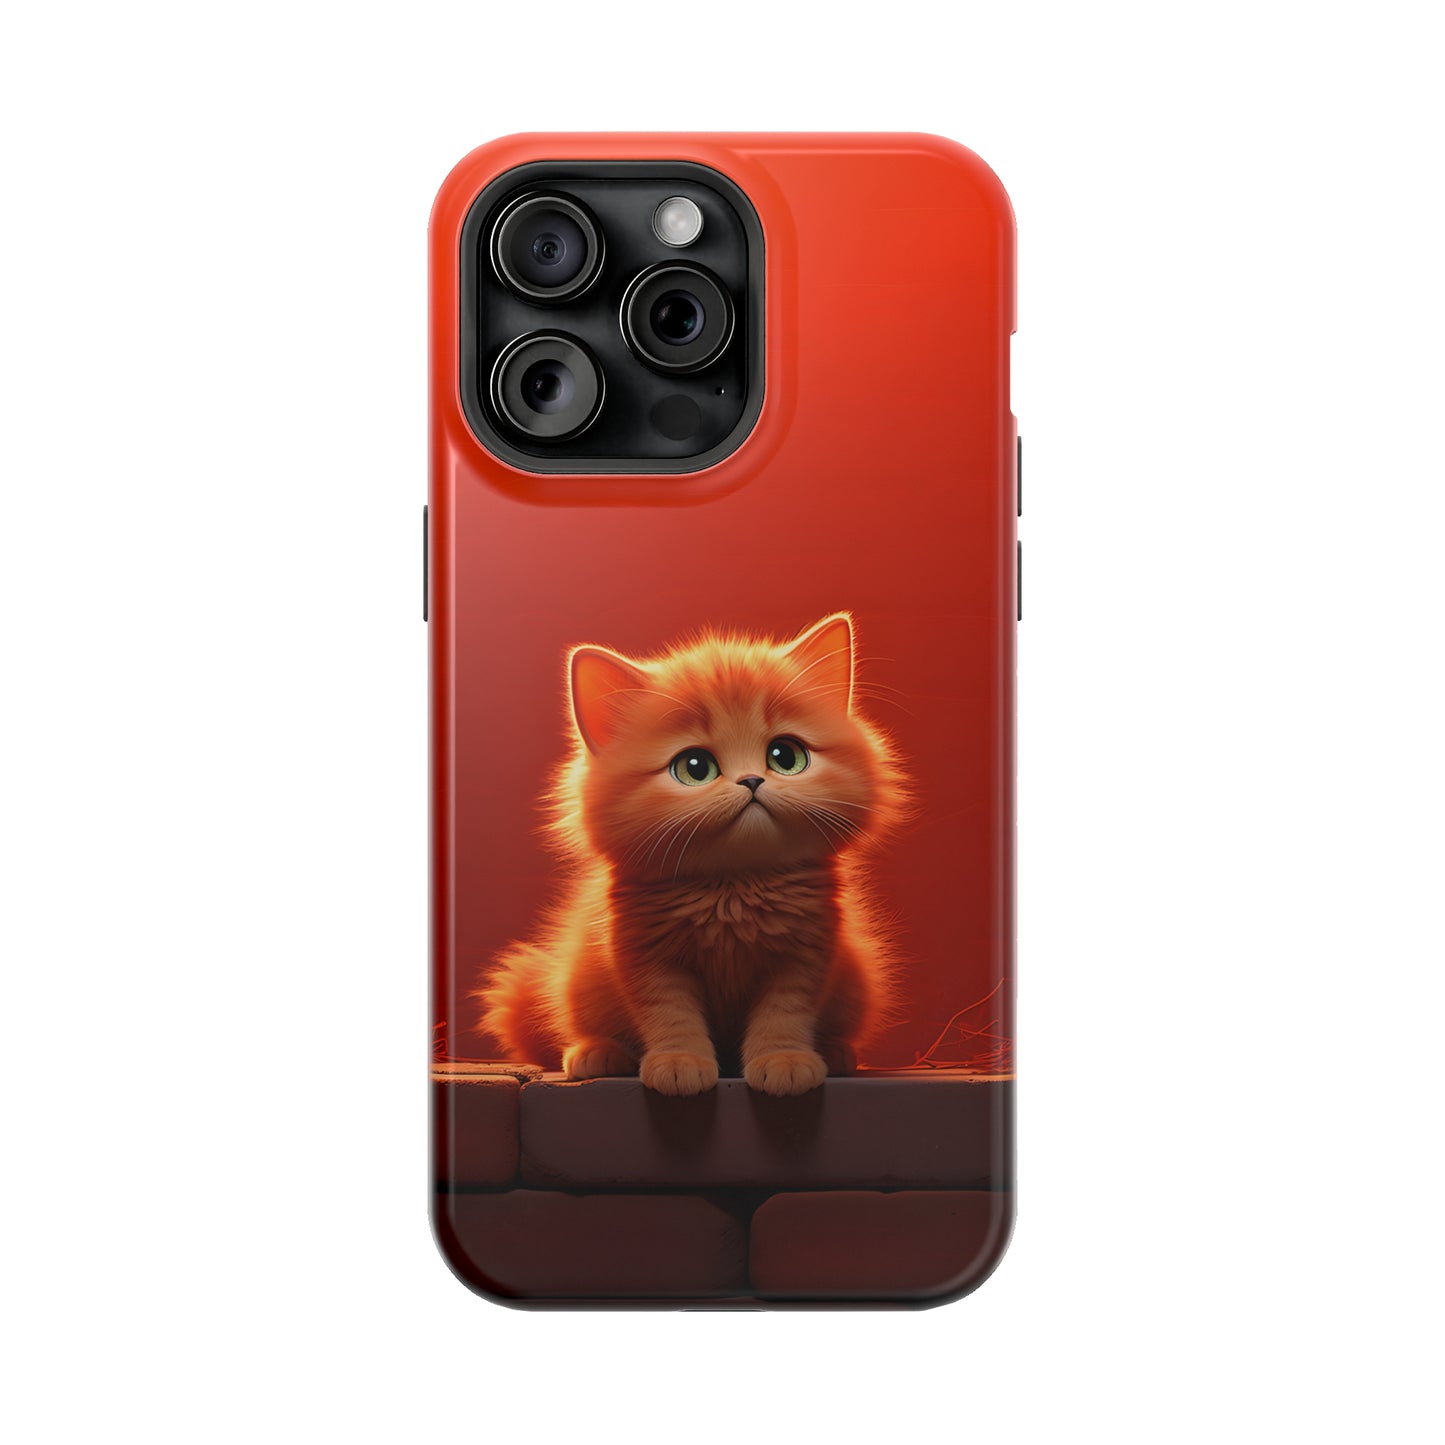 Cat Sitting On a Wall MagSafe Durable Case: Style Meets Protection 📱✨
Upgrade your device with Rima Gallery's Cat Sitting On a Wall MagSafe Durable Case. This case -Wall (iPhone MagSafe Case)